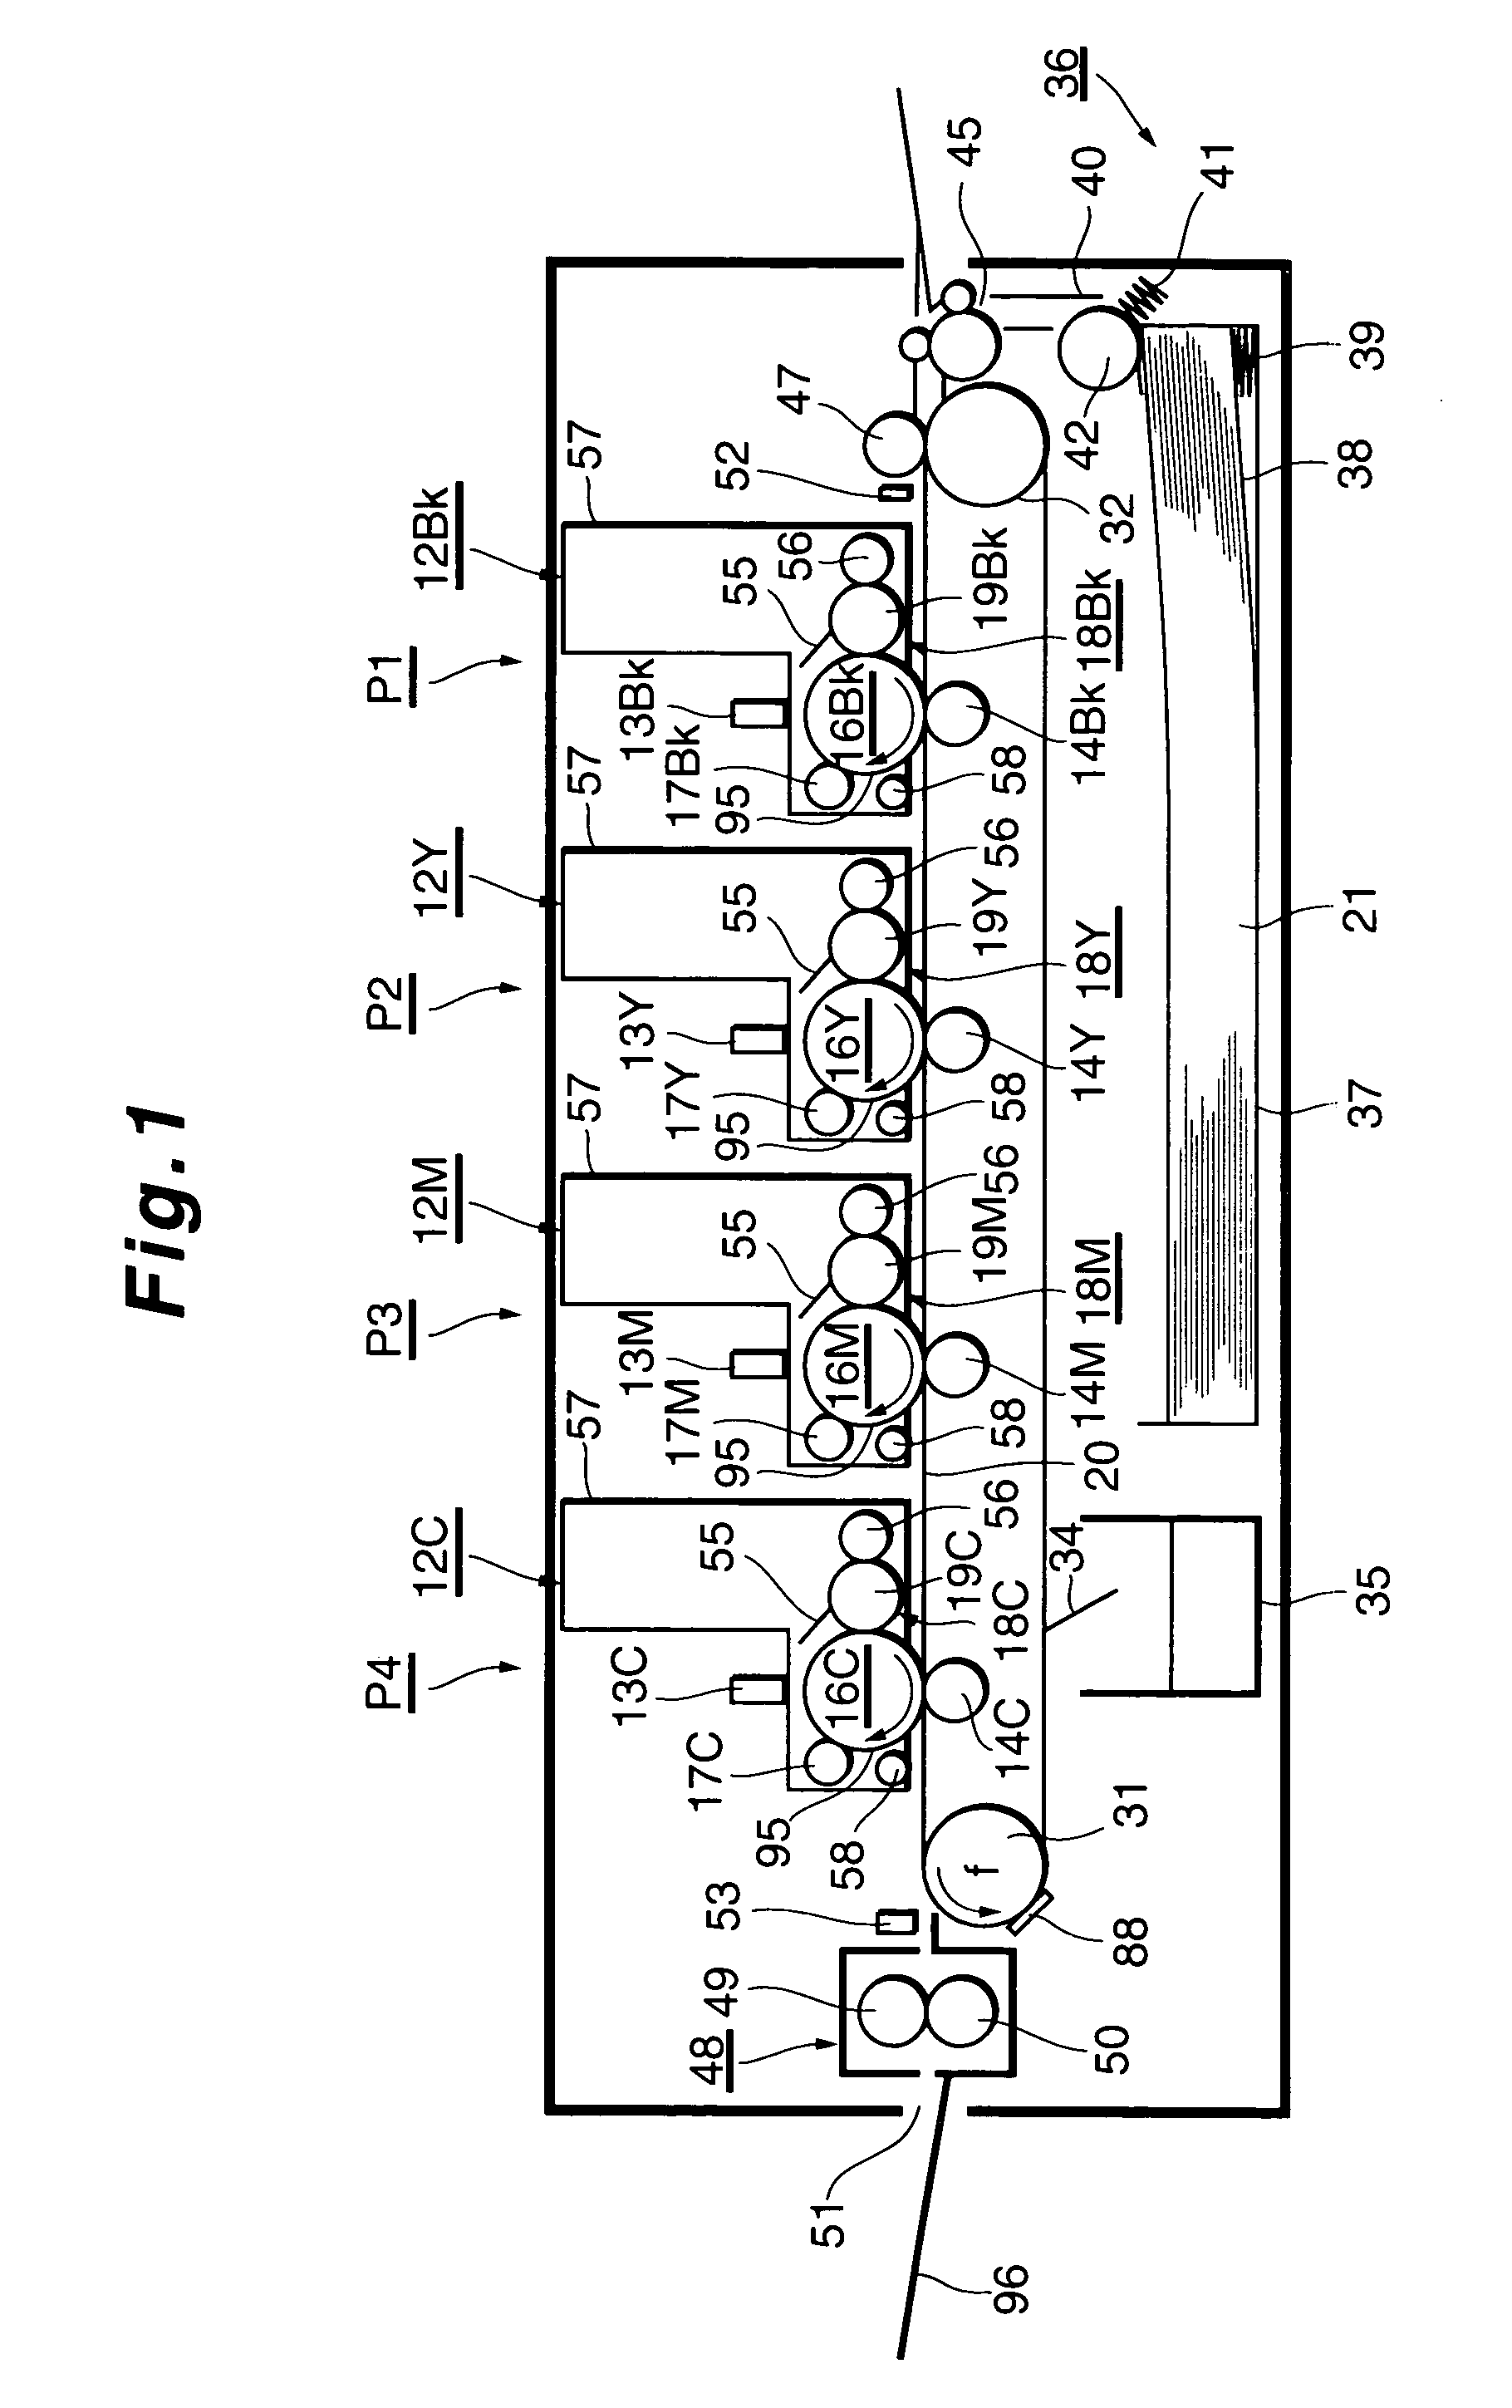 Image forming apparatus that controls image forming process based on temperature of conveying belt